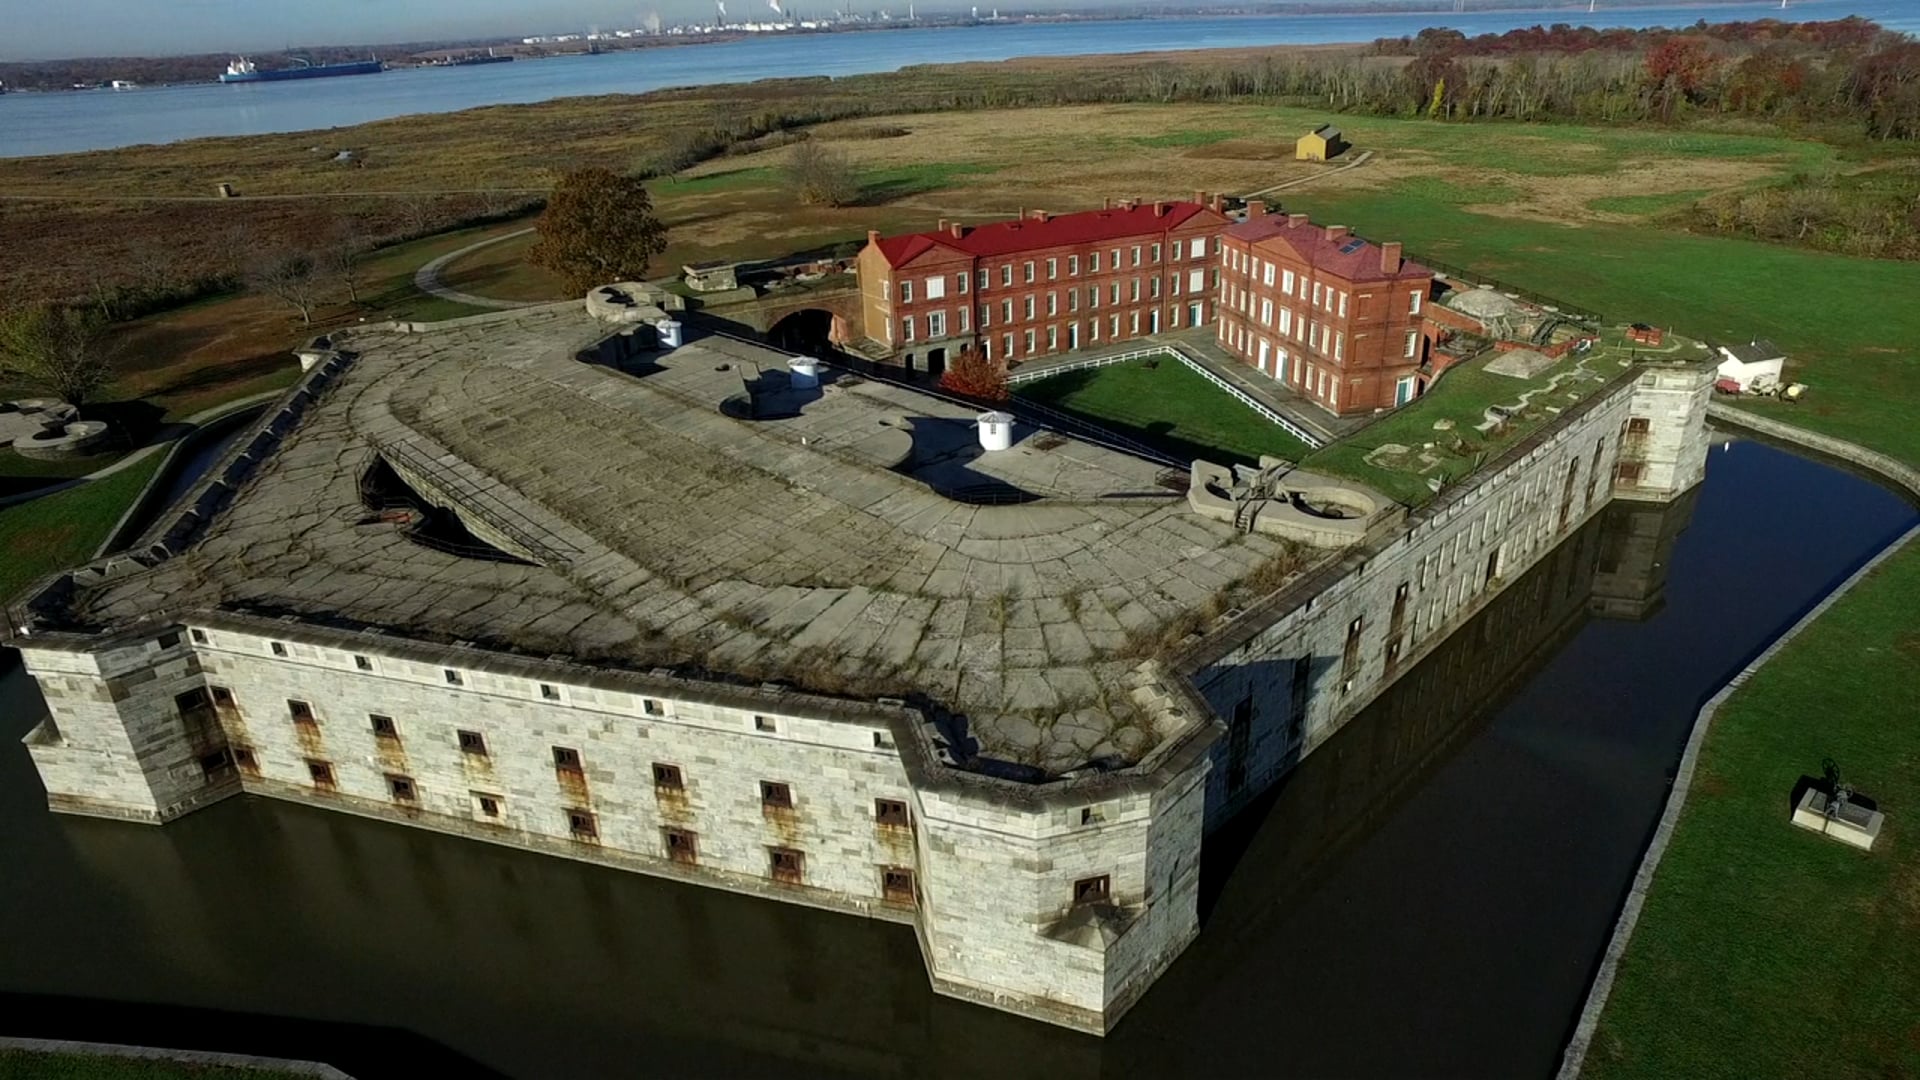 Pea Patch Island and Fort Delaware